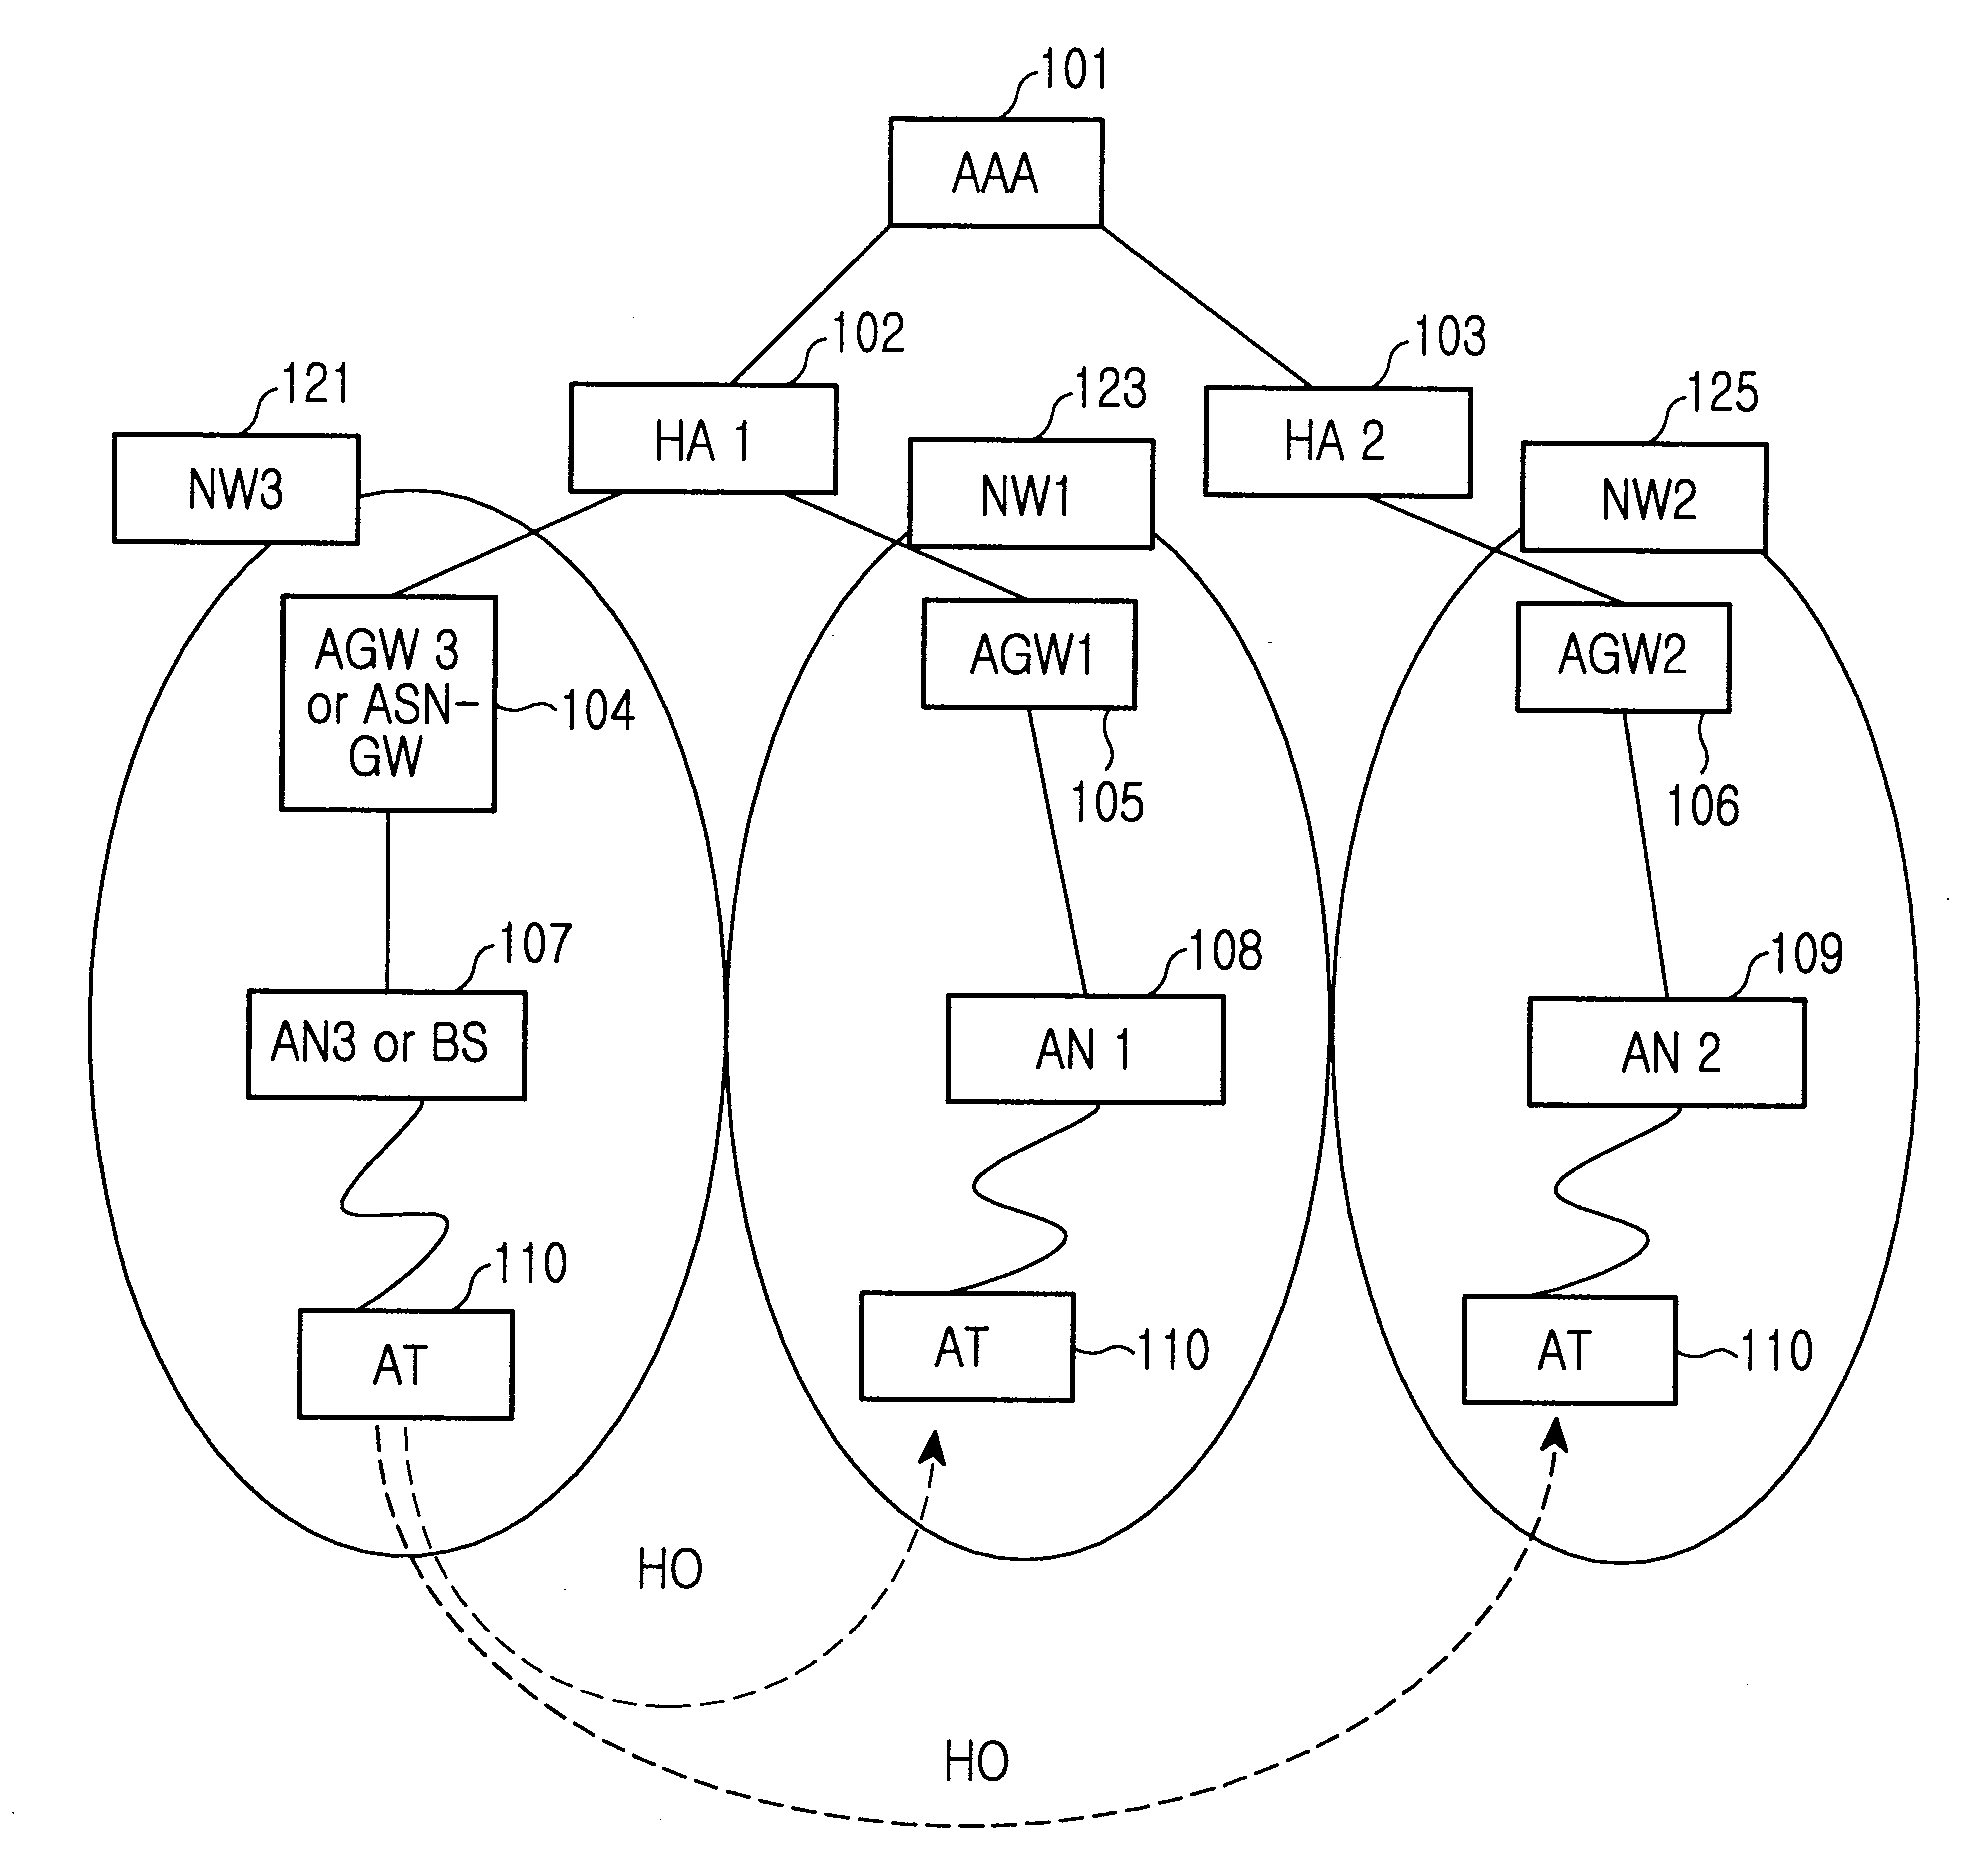 Method and system for managing mobility in a mobile communication system using mobile internet protocol